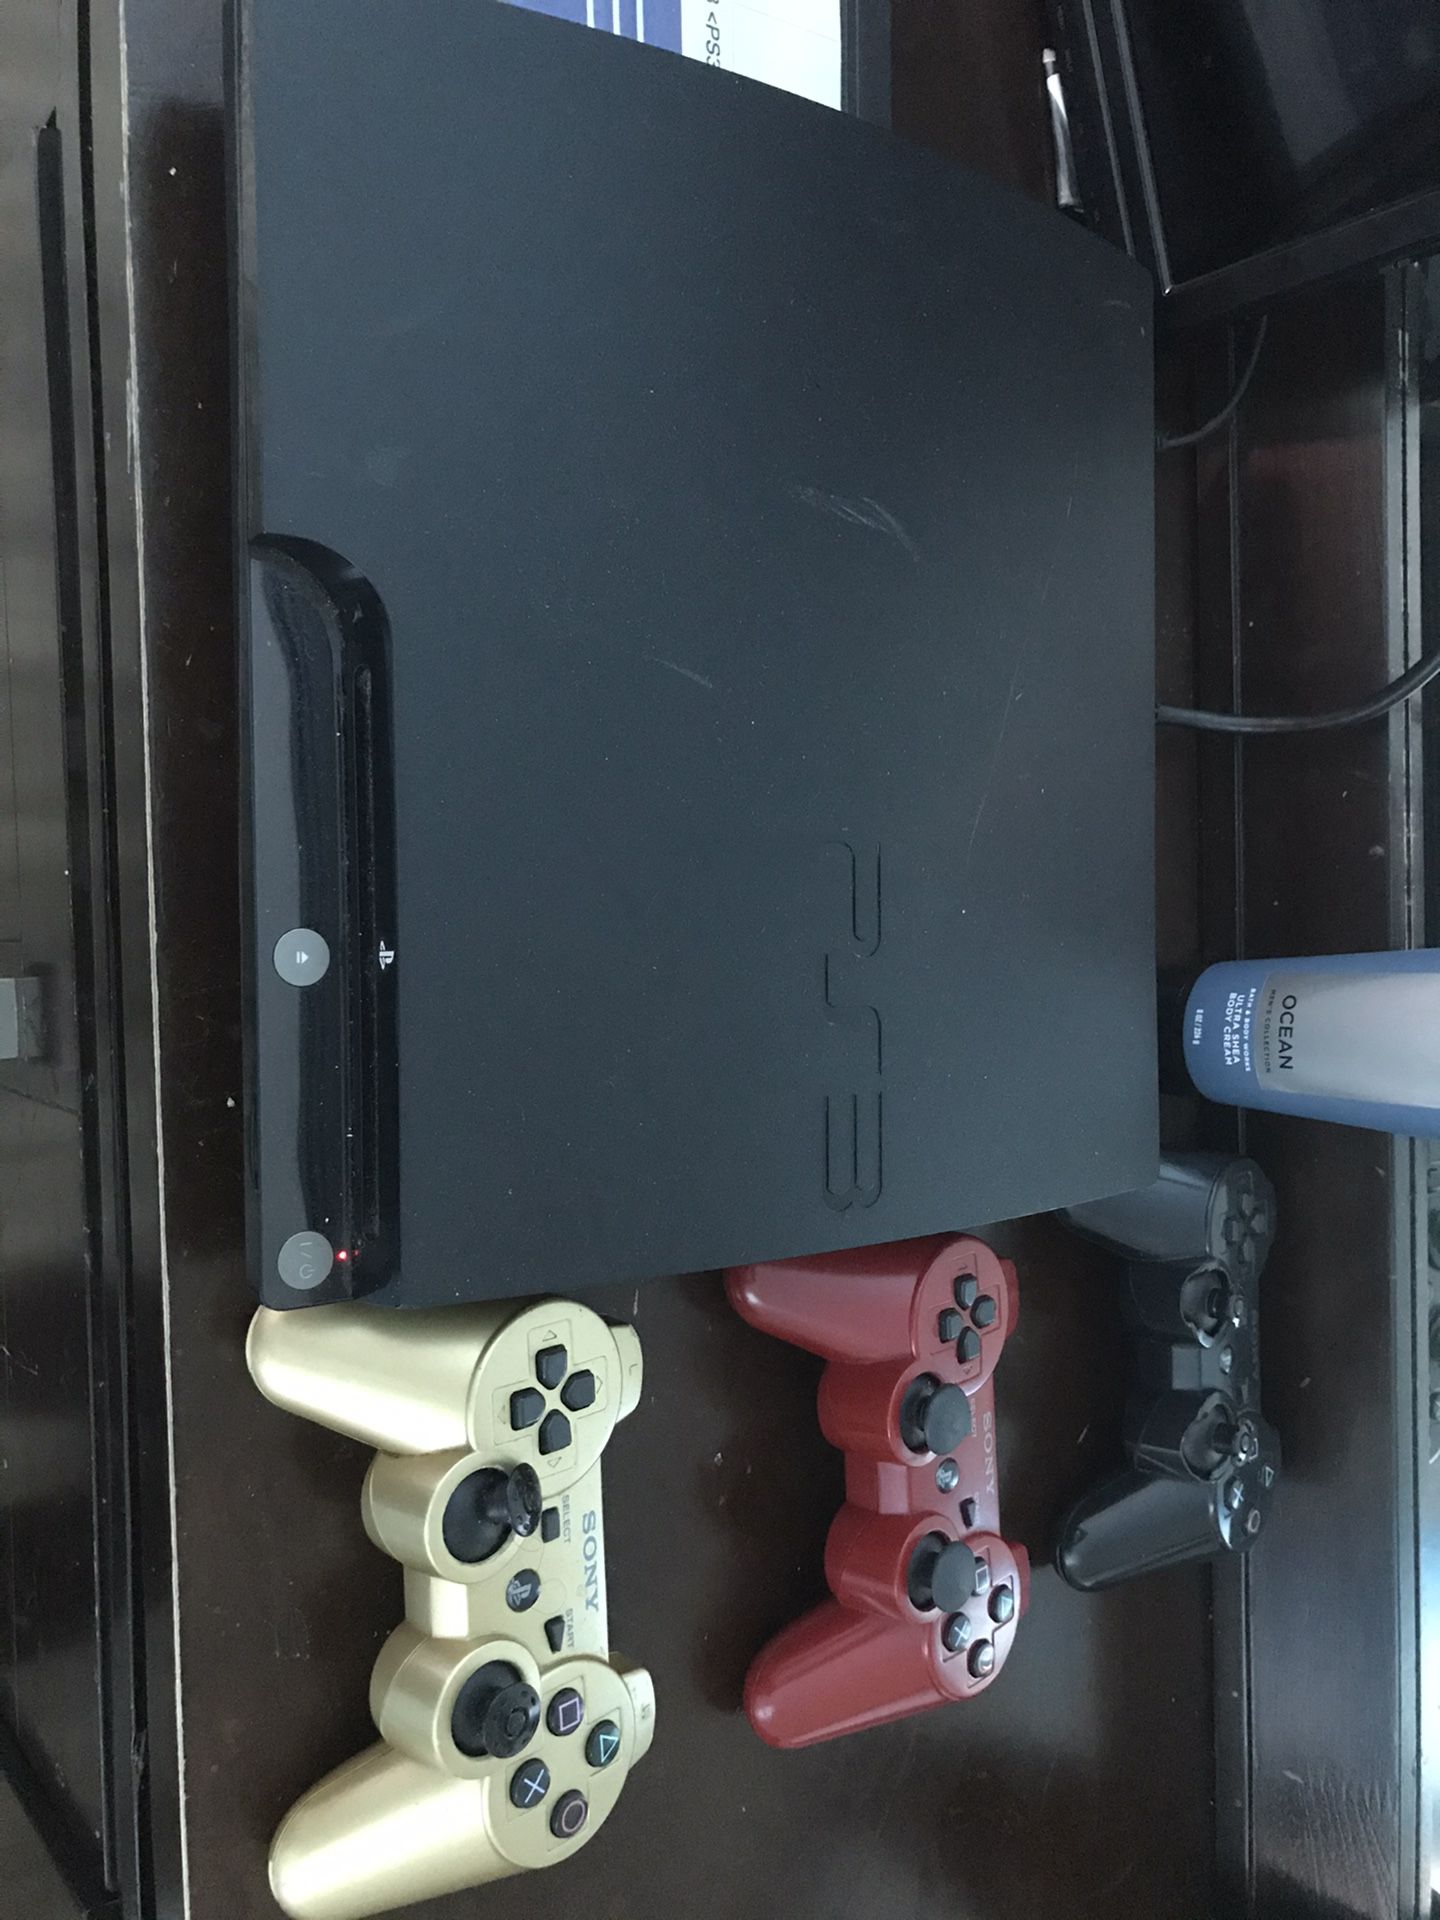 Ps3 + 2 controllers